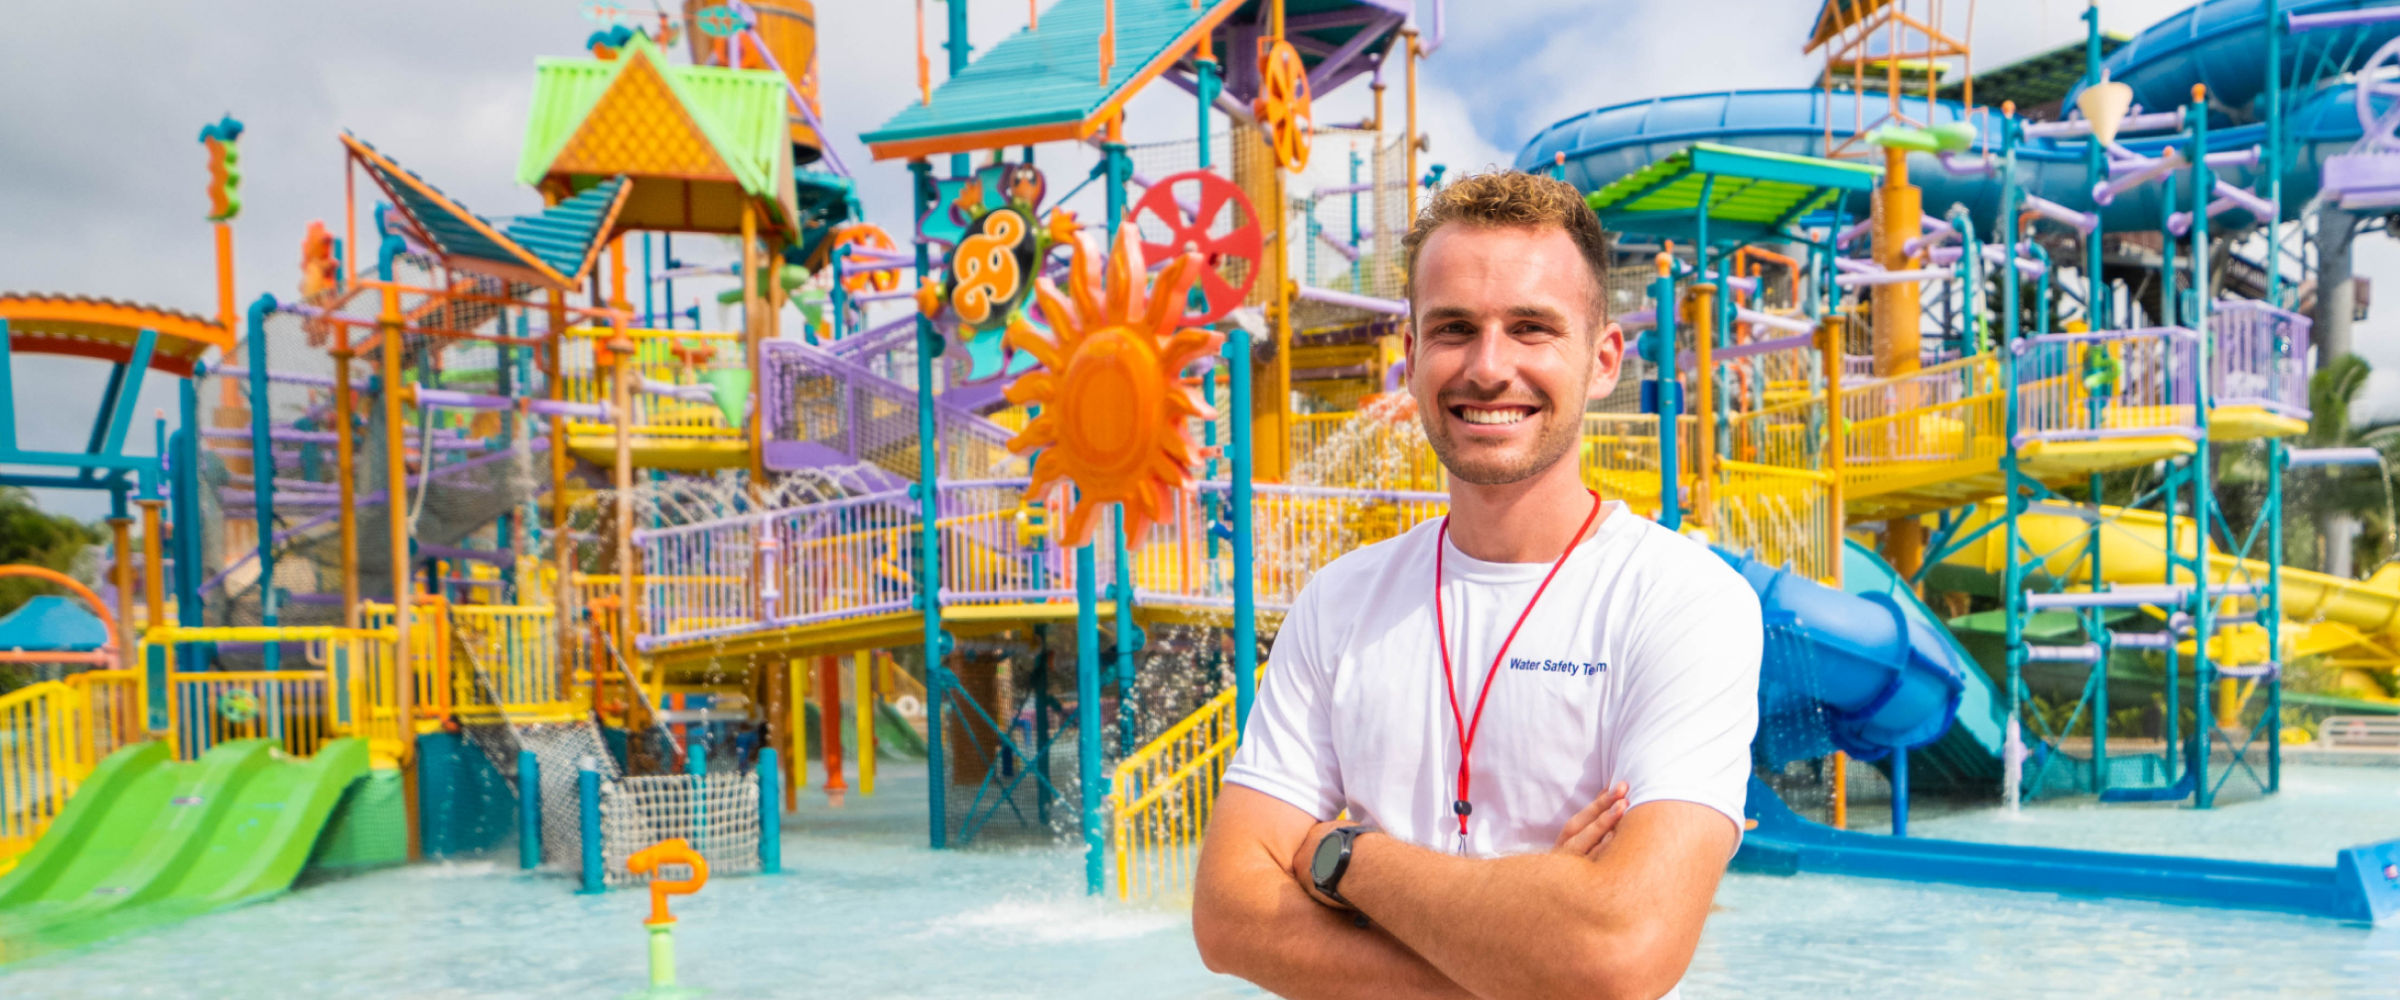 A member of the Aquatica water safety team stands in front of an aquatic playground